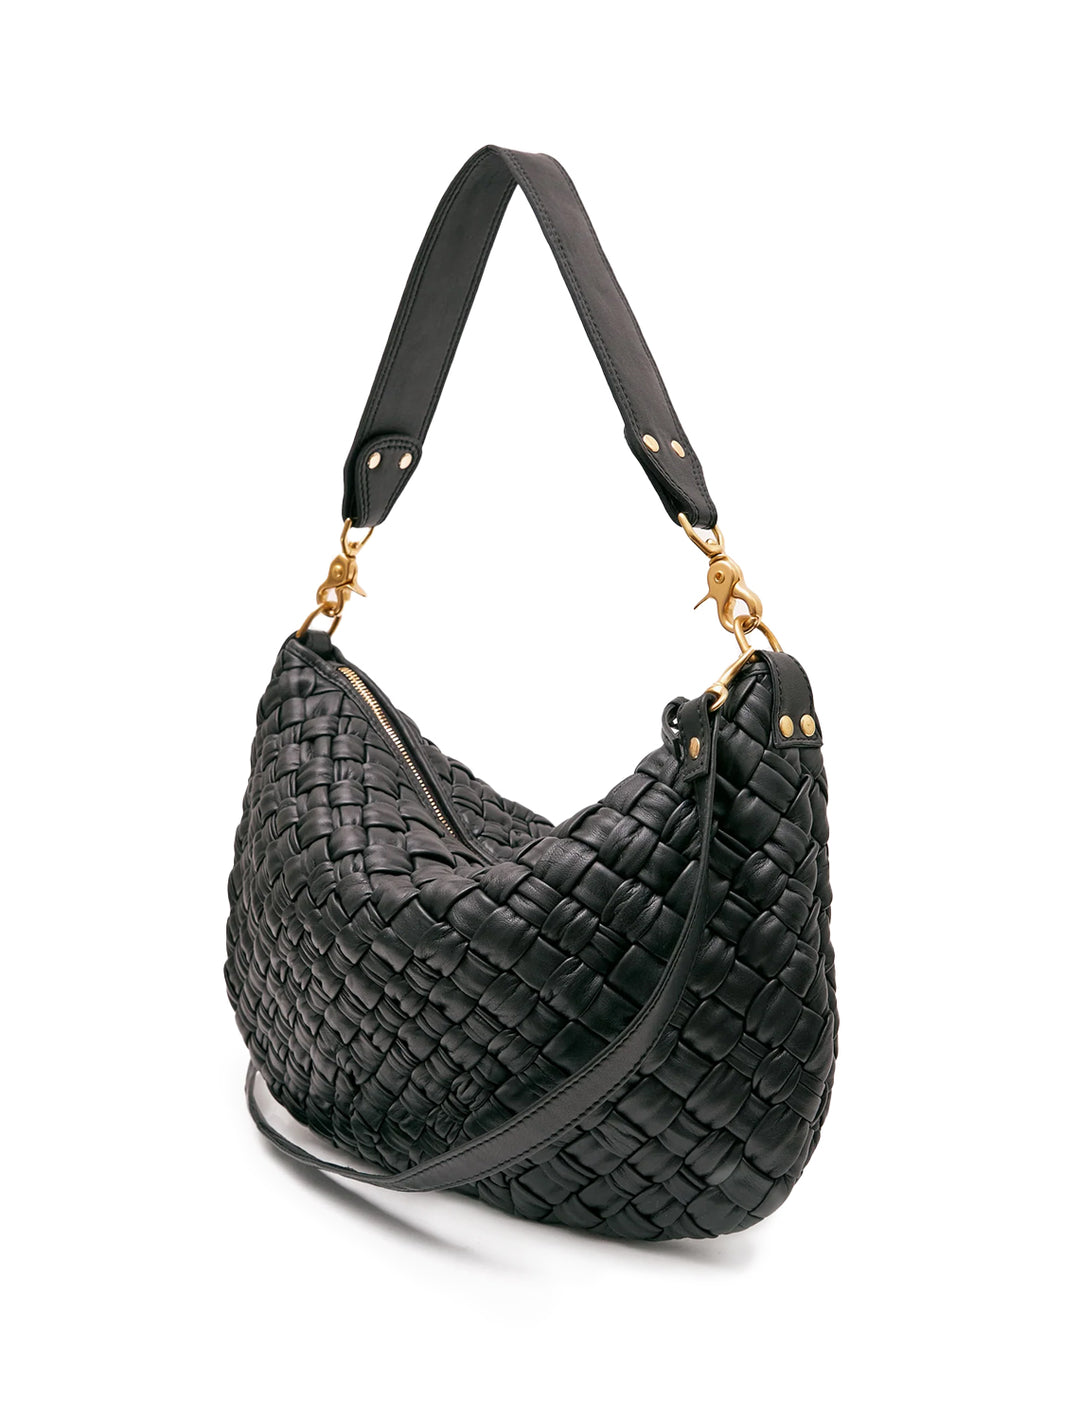 Front angle view of Clare V.'s moyen messenger in black puffy woven.